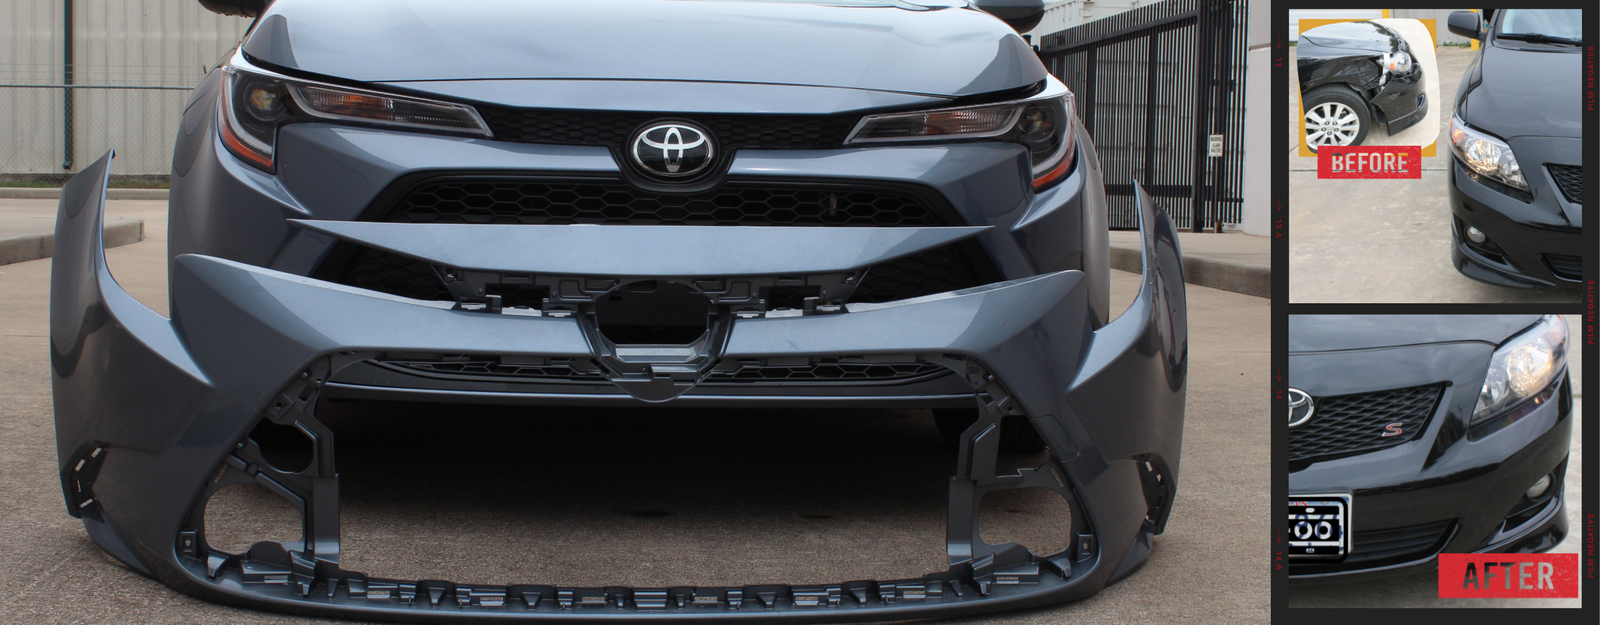 Painted Bumpers - Front and Rear Bumper Replacements - ReveMoto Painted Auto Body Parts